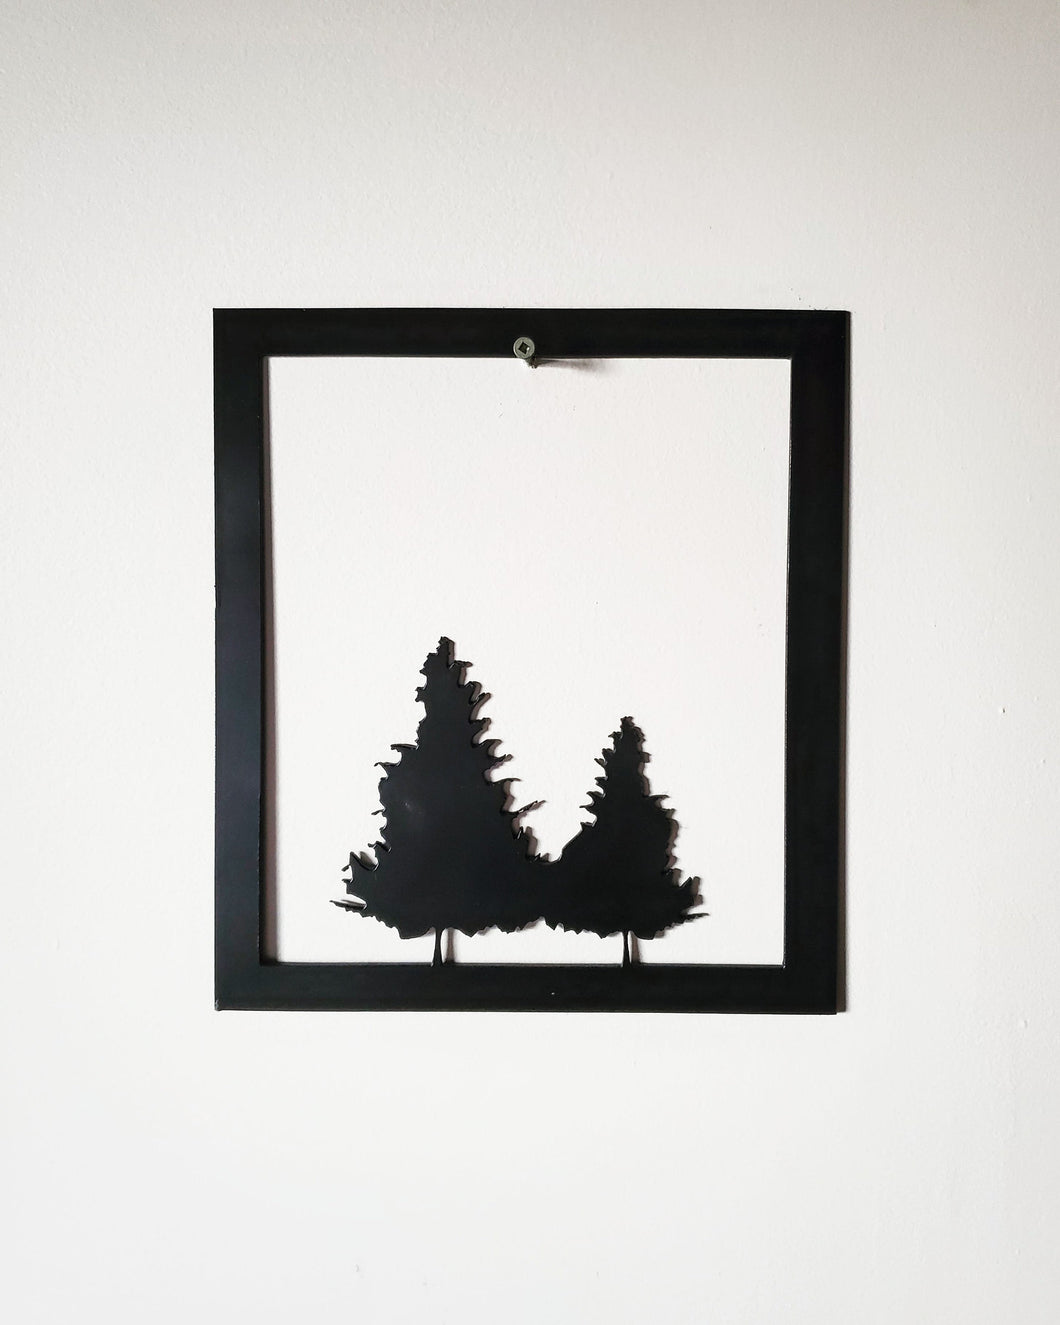 Picture Frame Pine Tree Wall Art